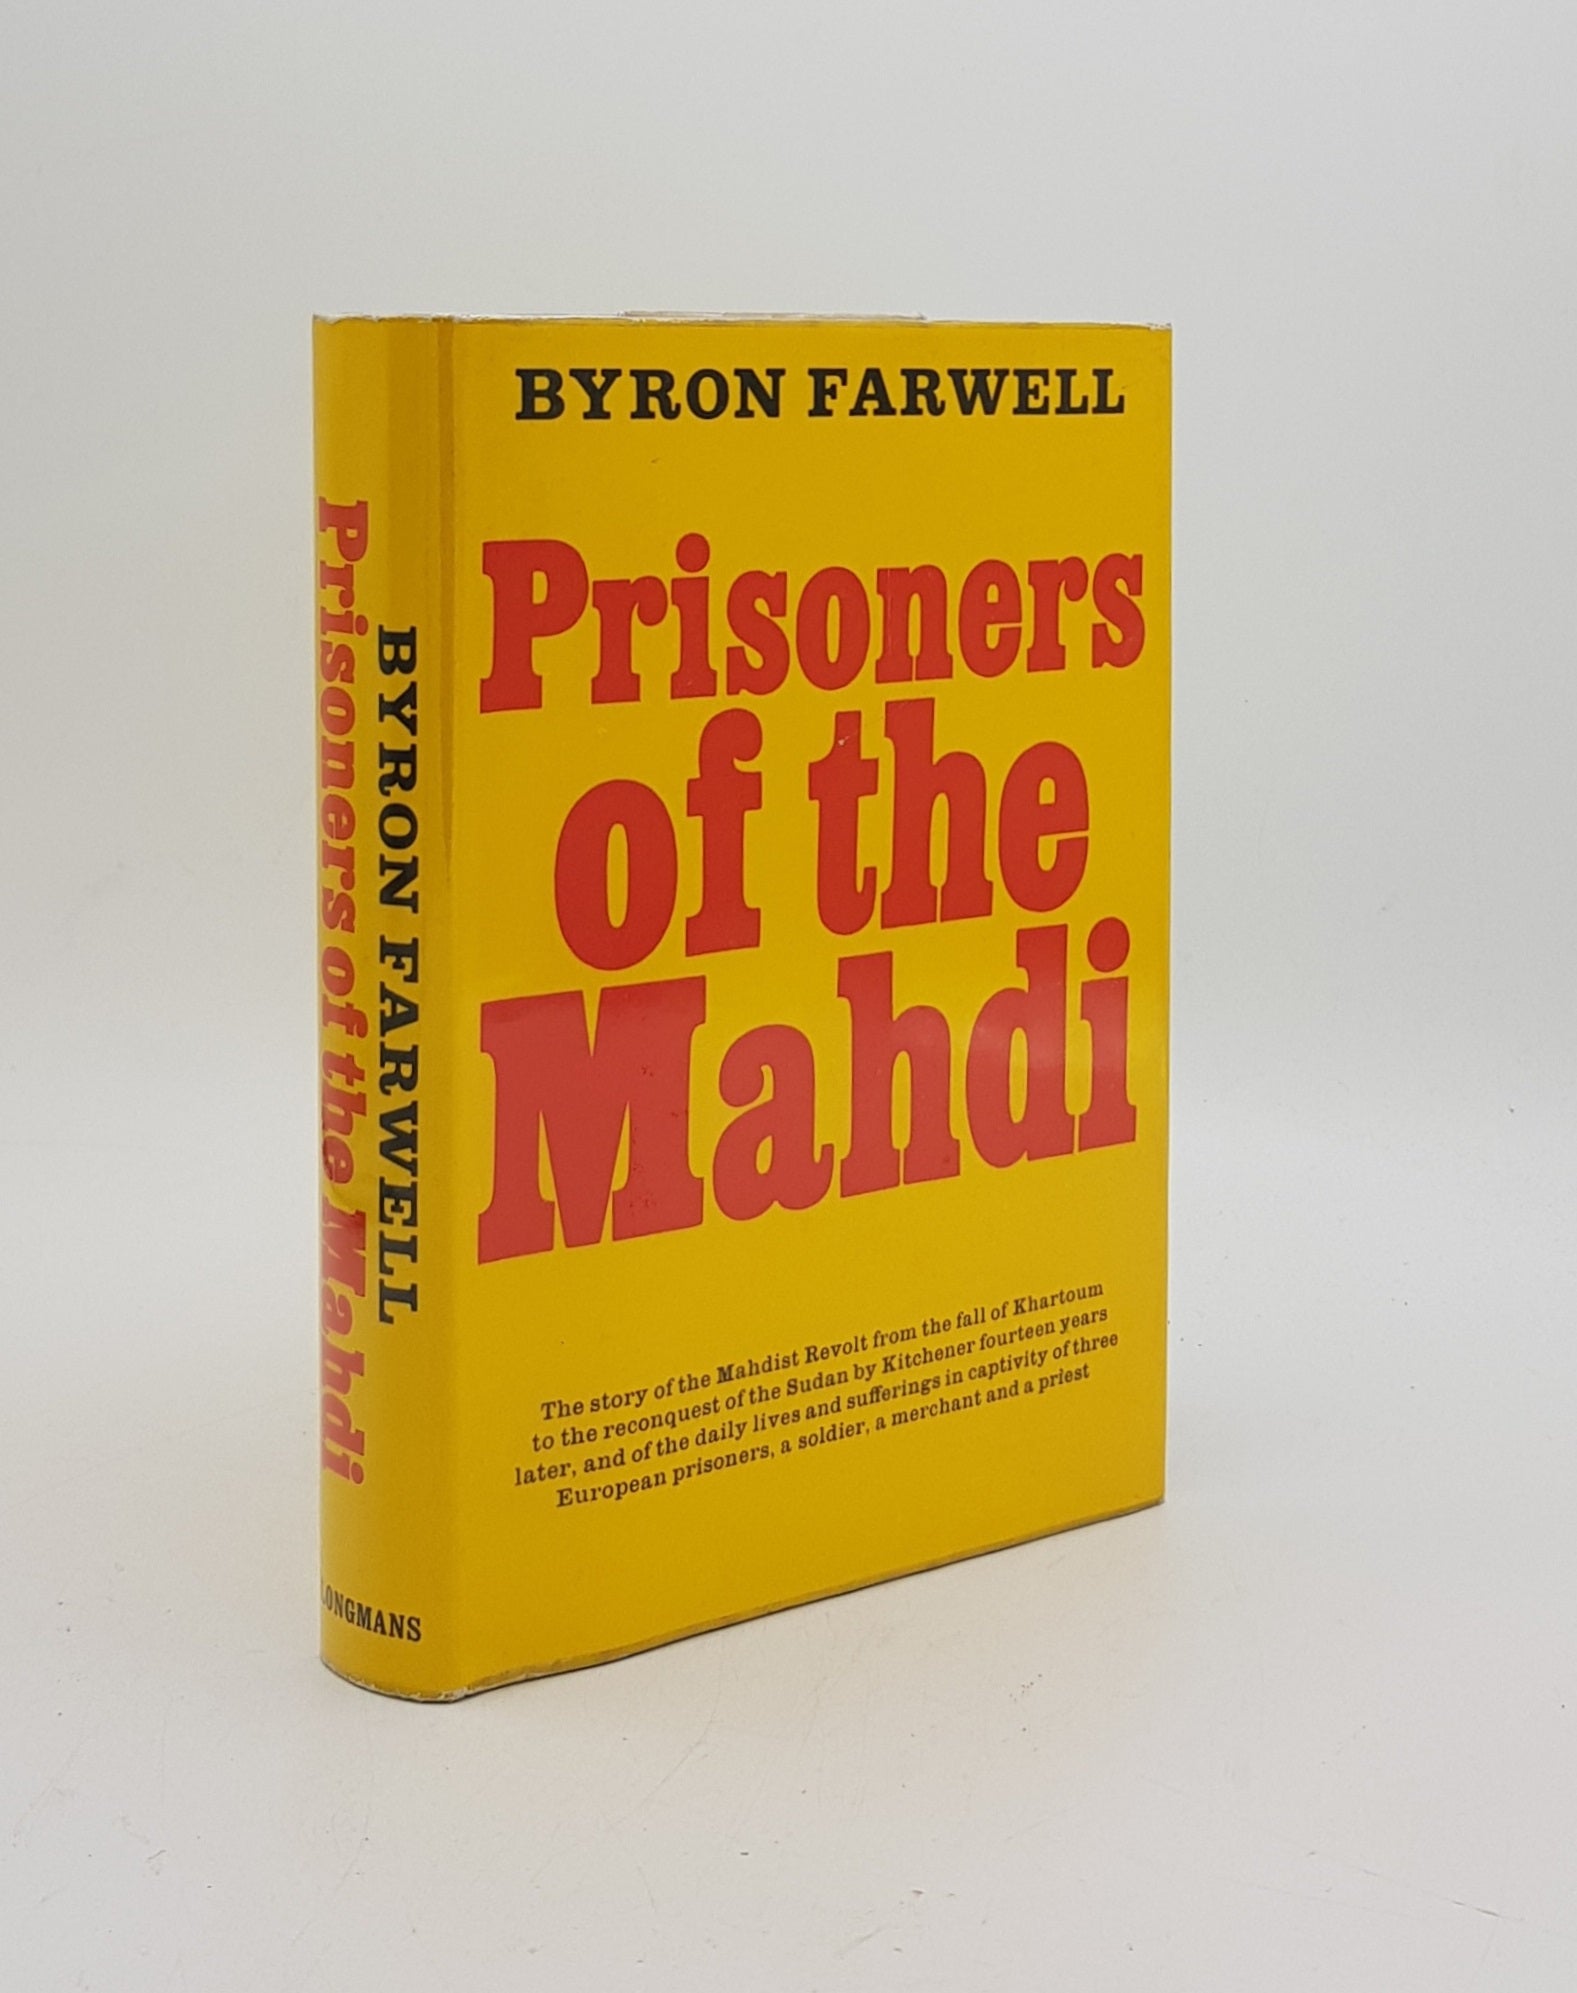 FARWELL Byron - Prisoners of the Mahdi the Story of the Mahdist Revolt from the Fall of Khartoum to the Reconquest of the Sudan Fourteen Years Later and of the Daily Lives and Sufferings in Captivity of Three European Prisoners a Soldier a Merchant and a Priest